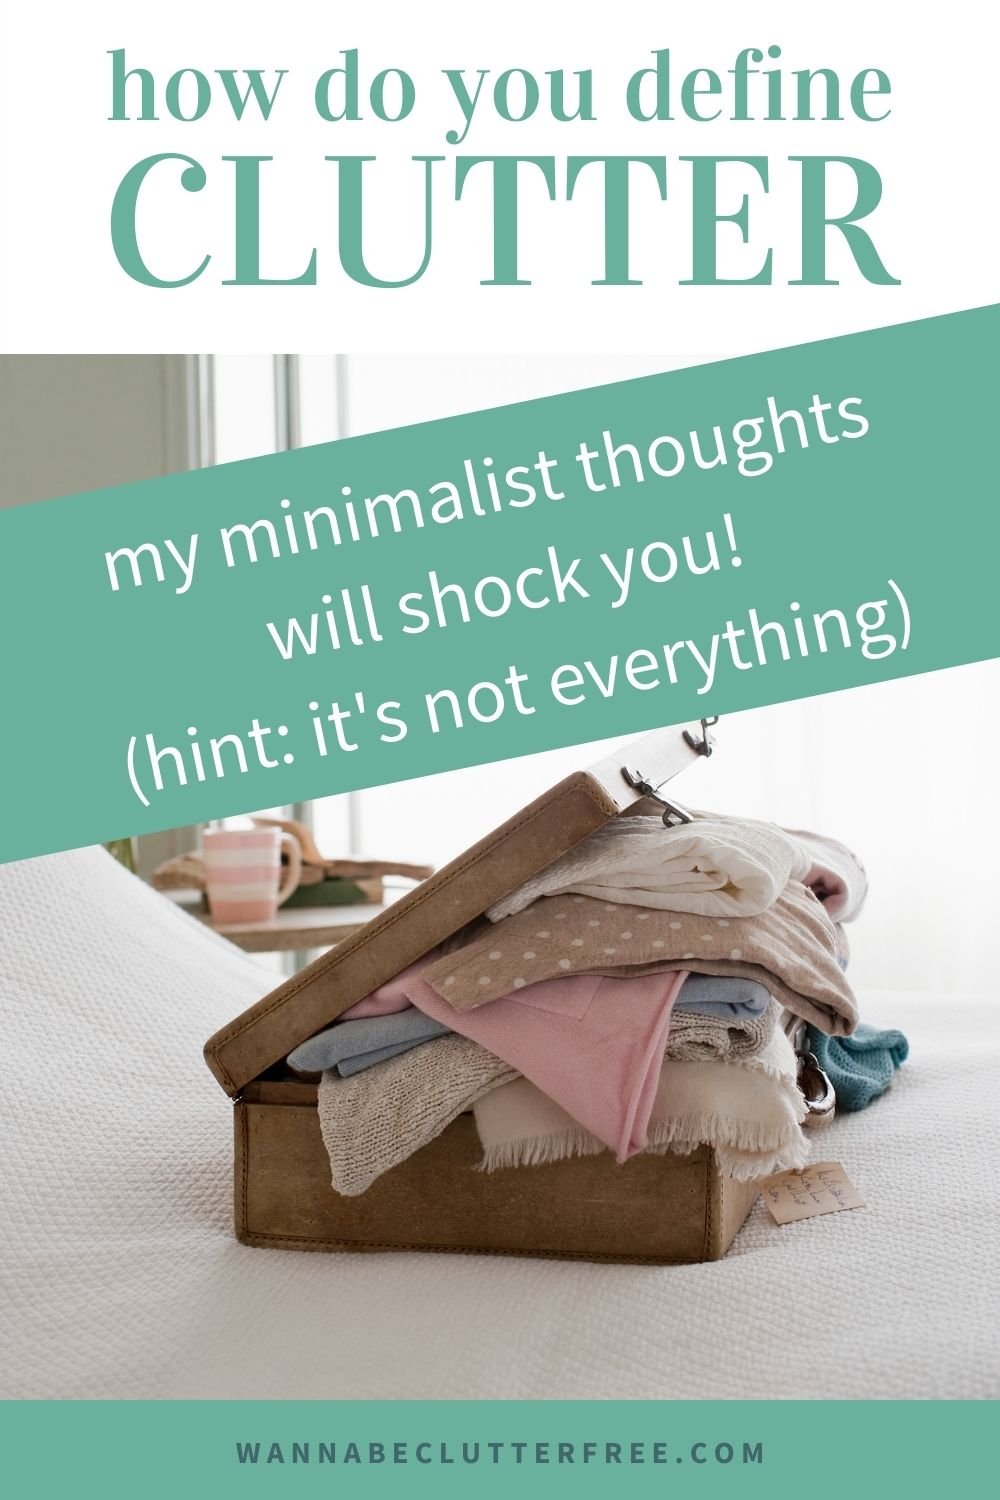 How do you define clutter